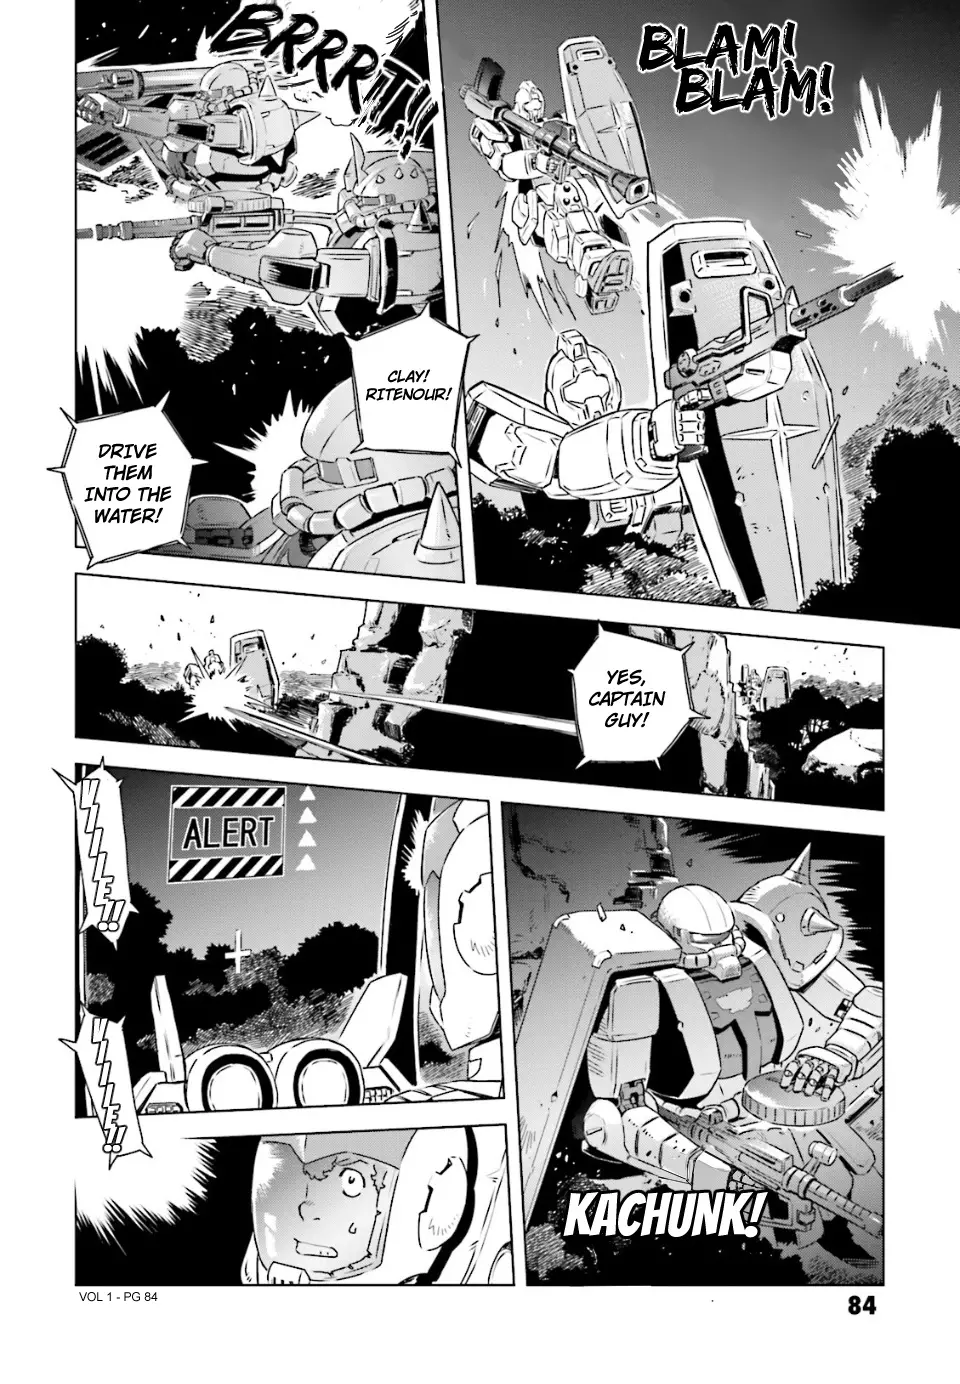 Mobile Suit Gundam Side Story - Missing Link - 3 page 18-659fd36a